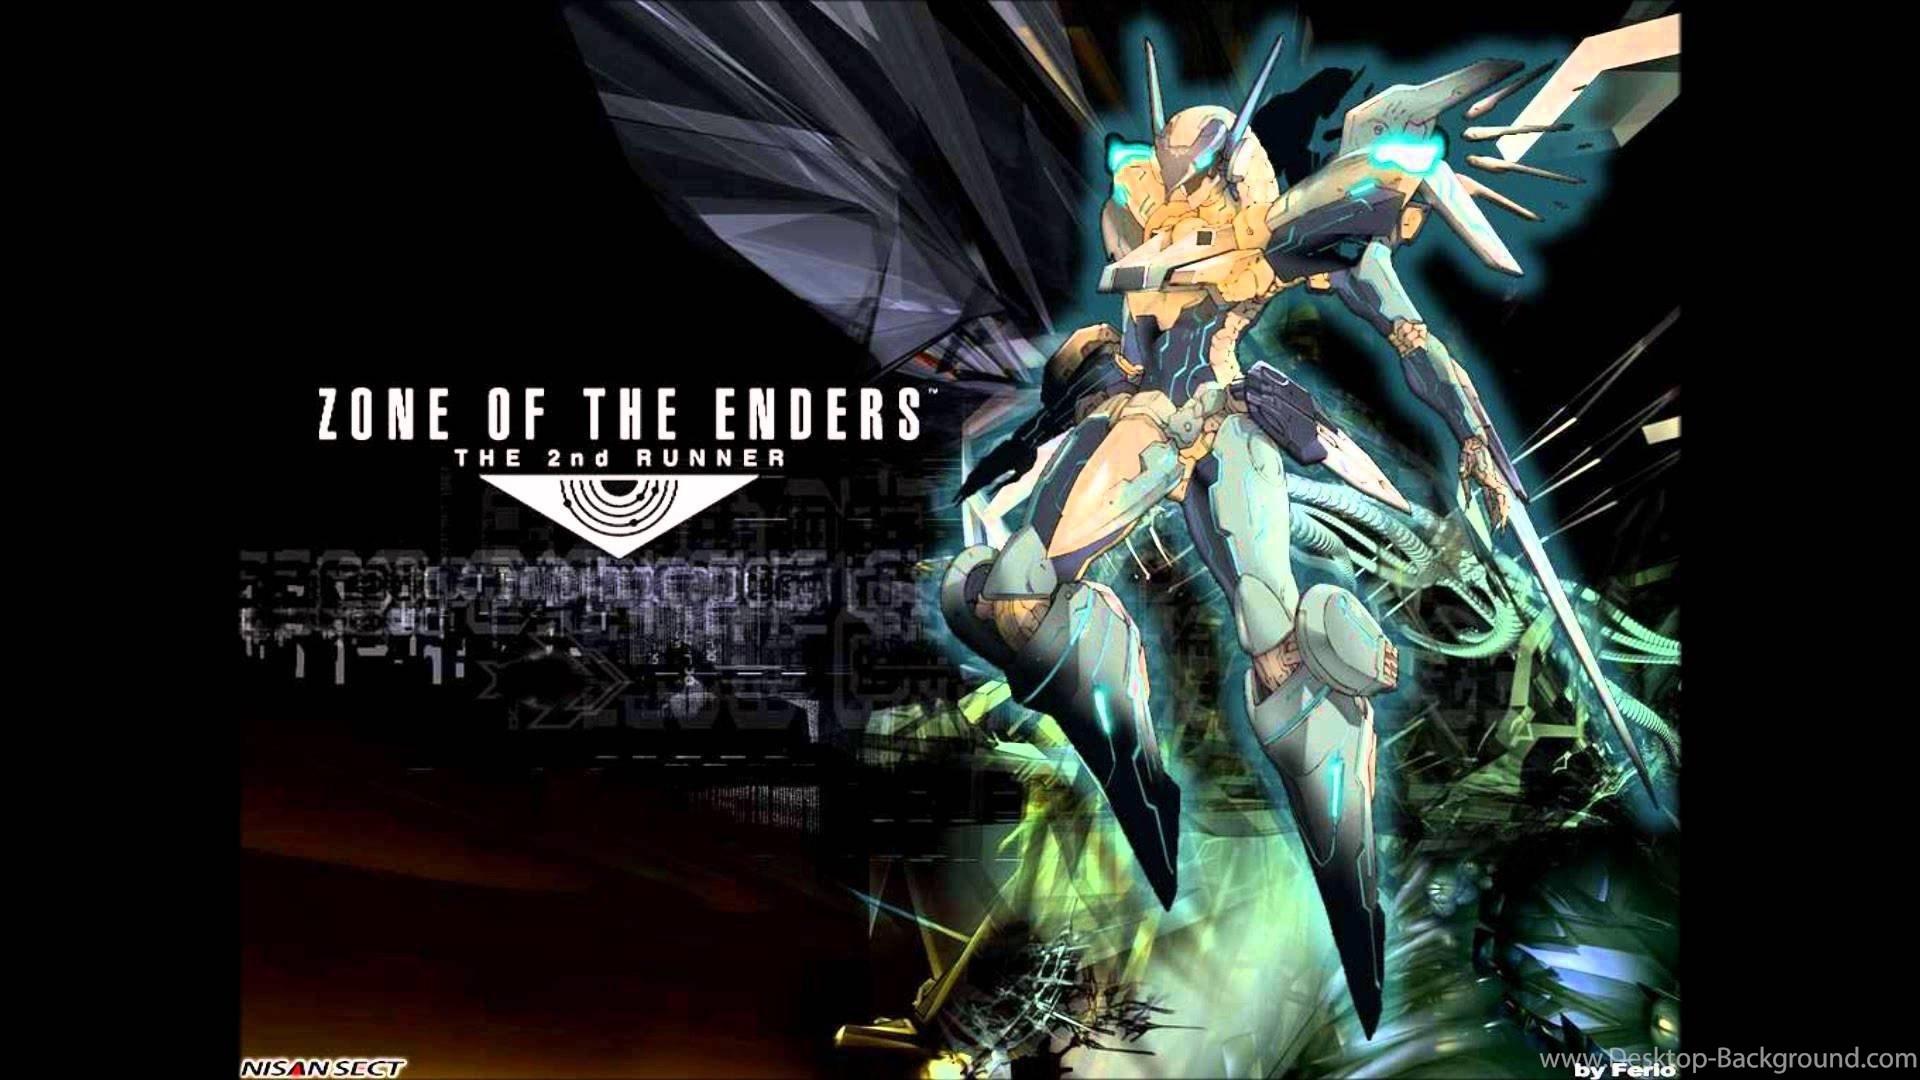 ZONE OF THE ENDERS ZOE Sci fi Action Mecha Fighting Wallpaper